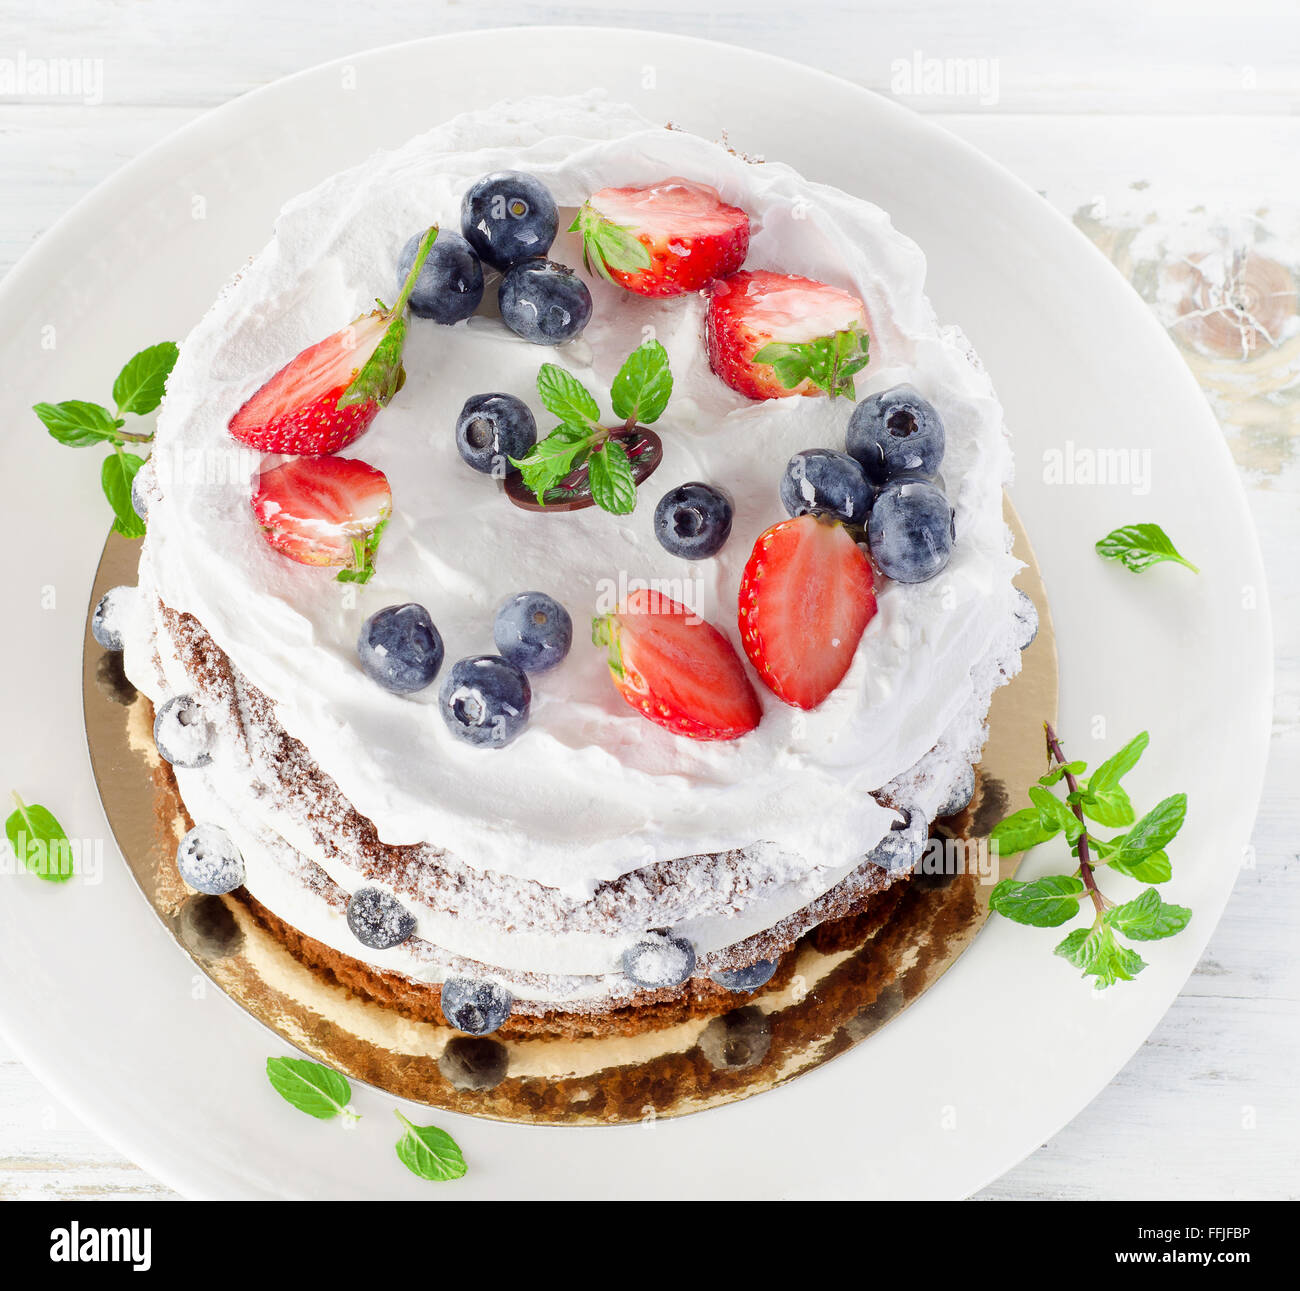 Cake with cream and berries. View from above Stock Photo